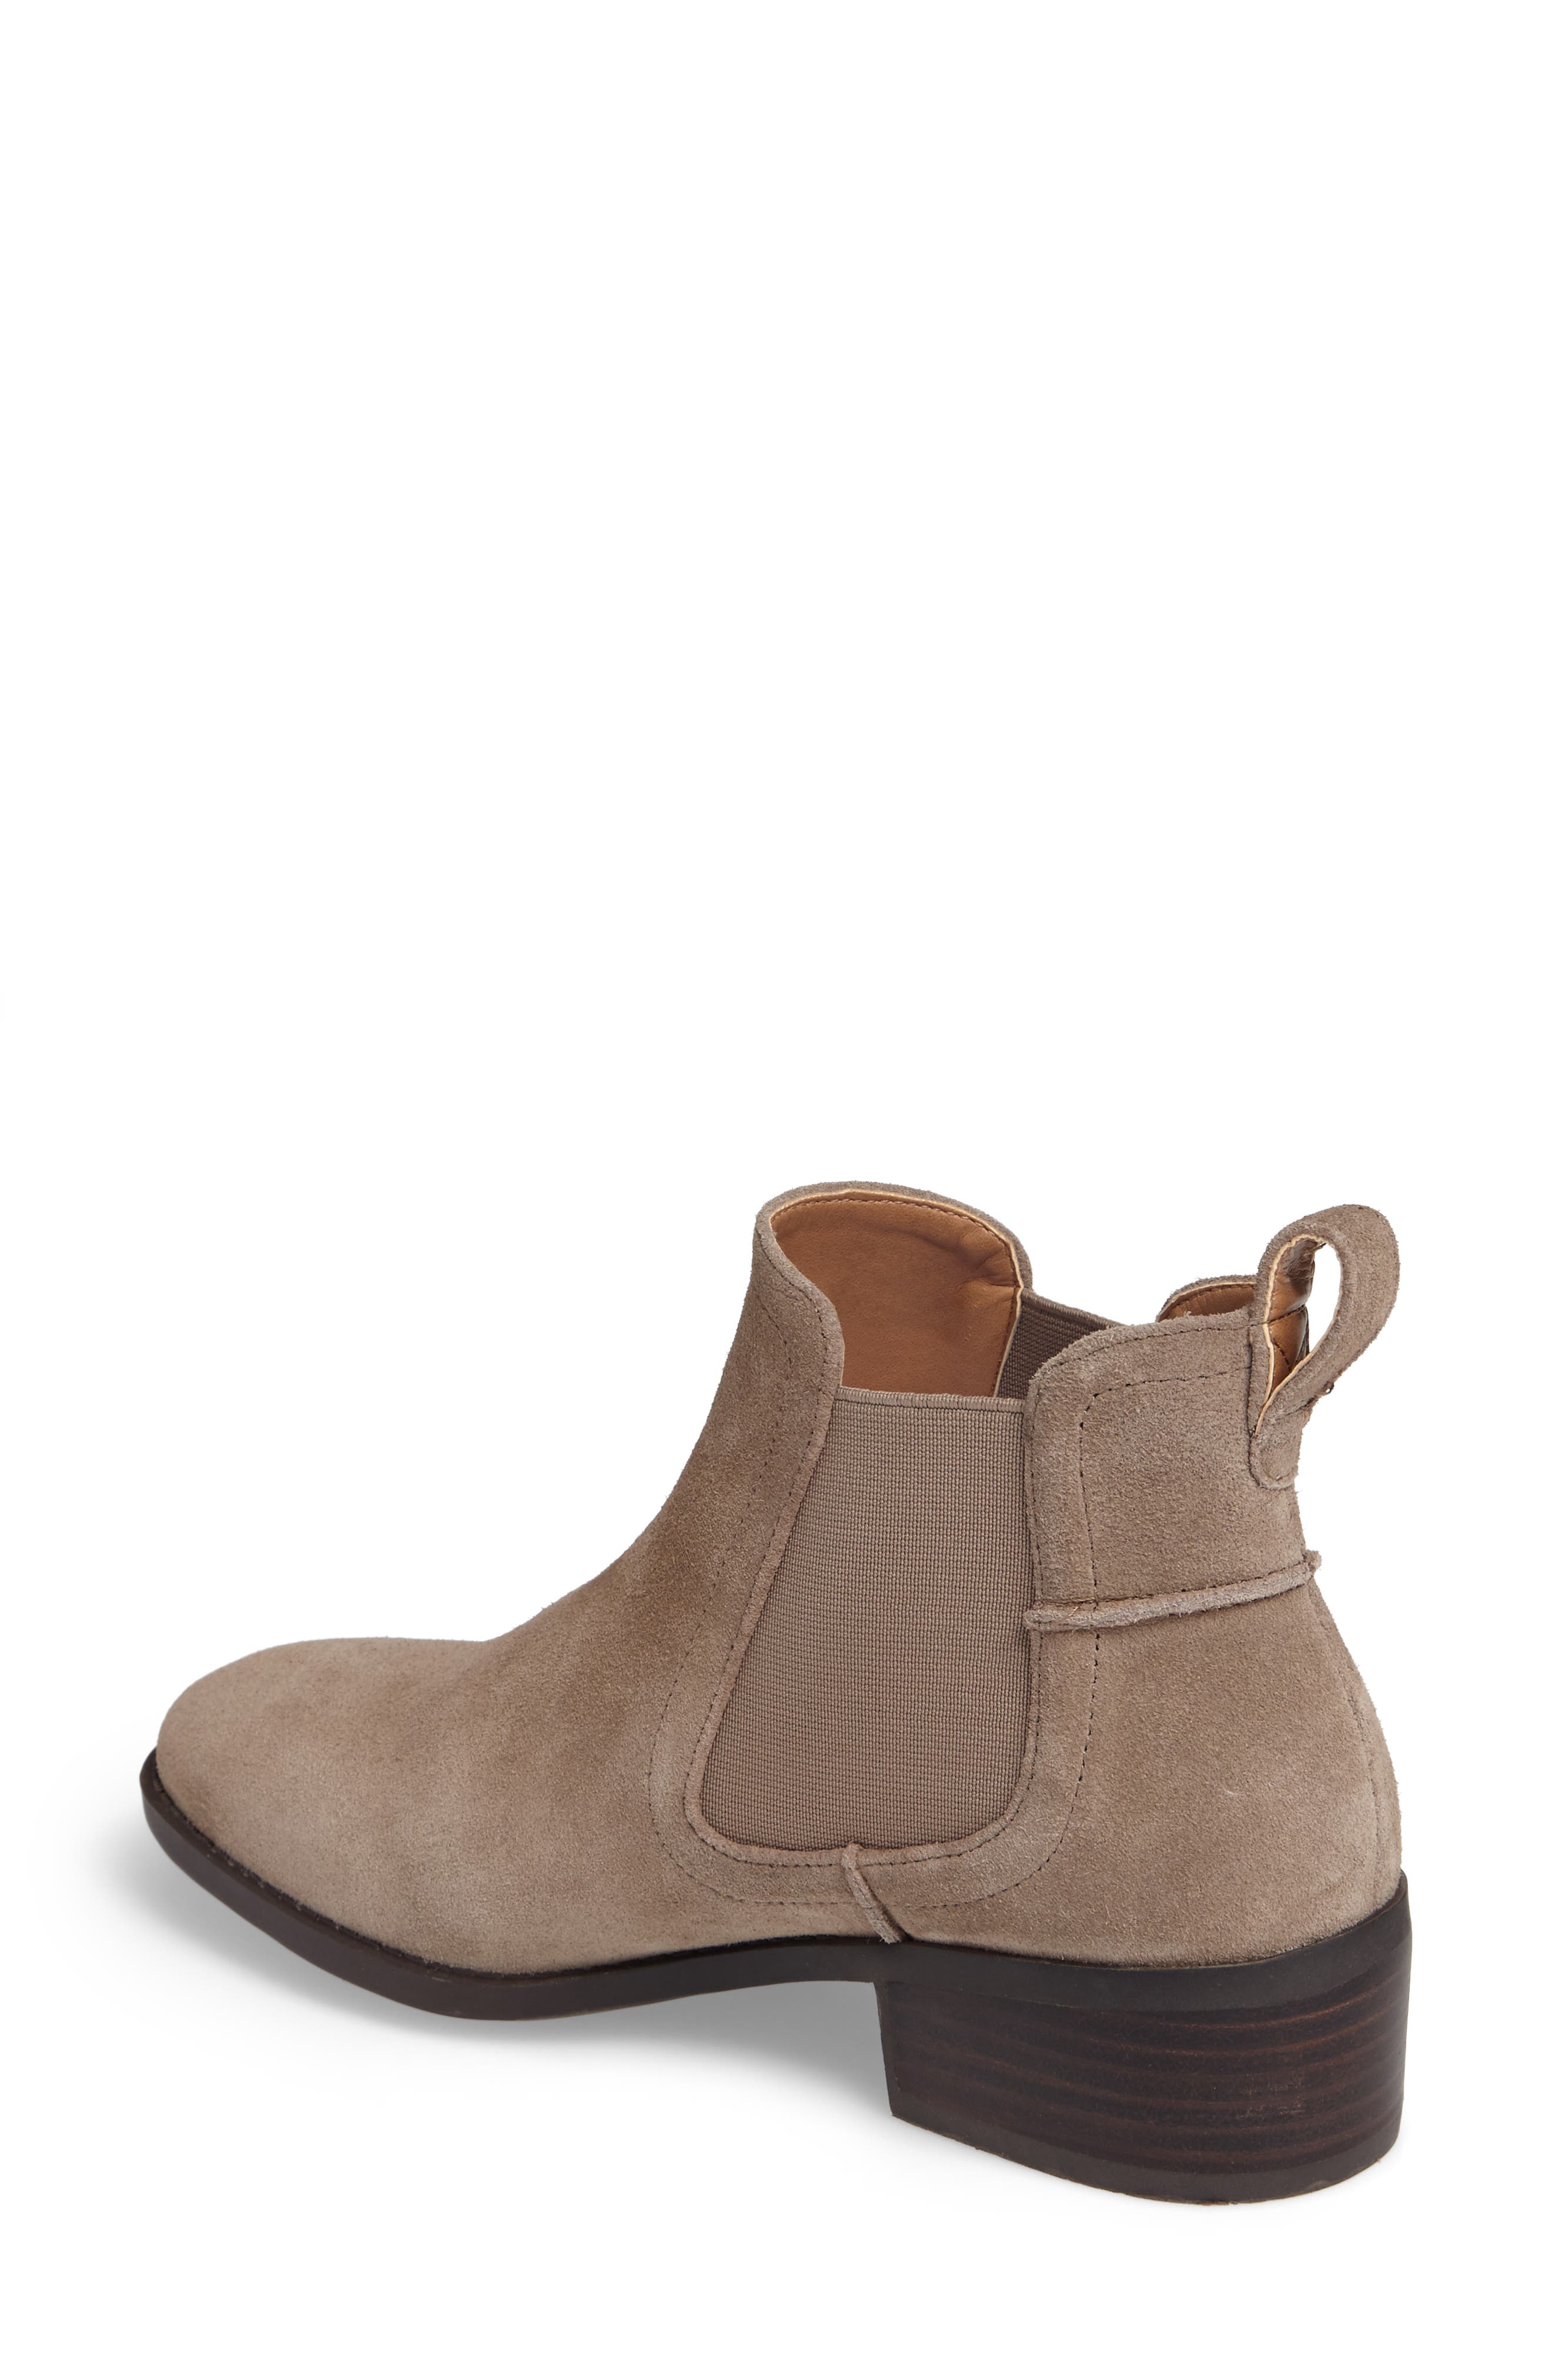 steve madden dicey booties